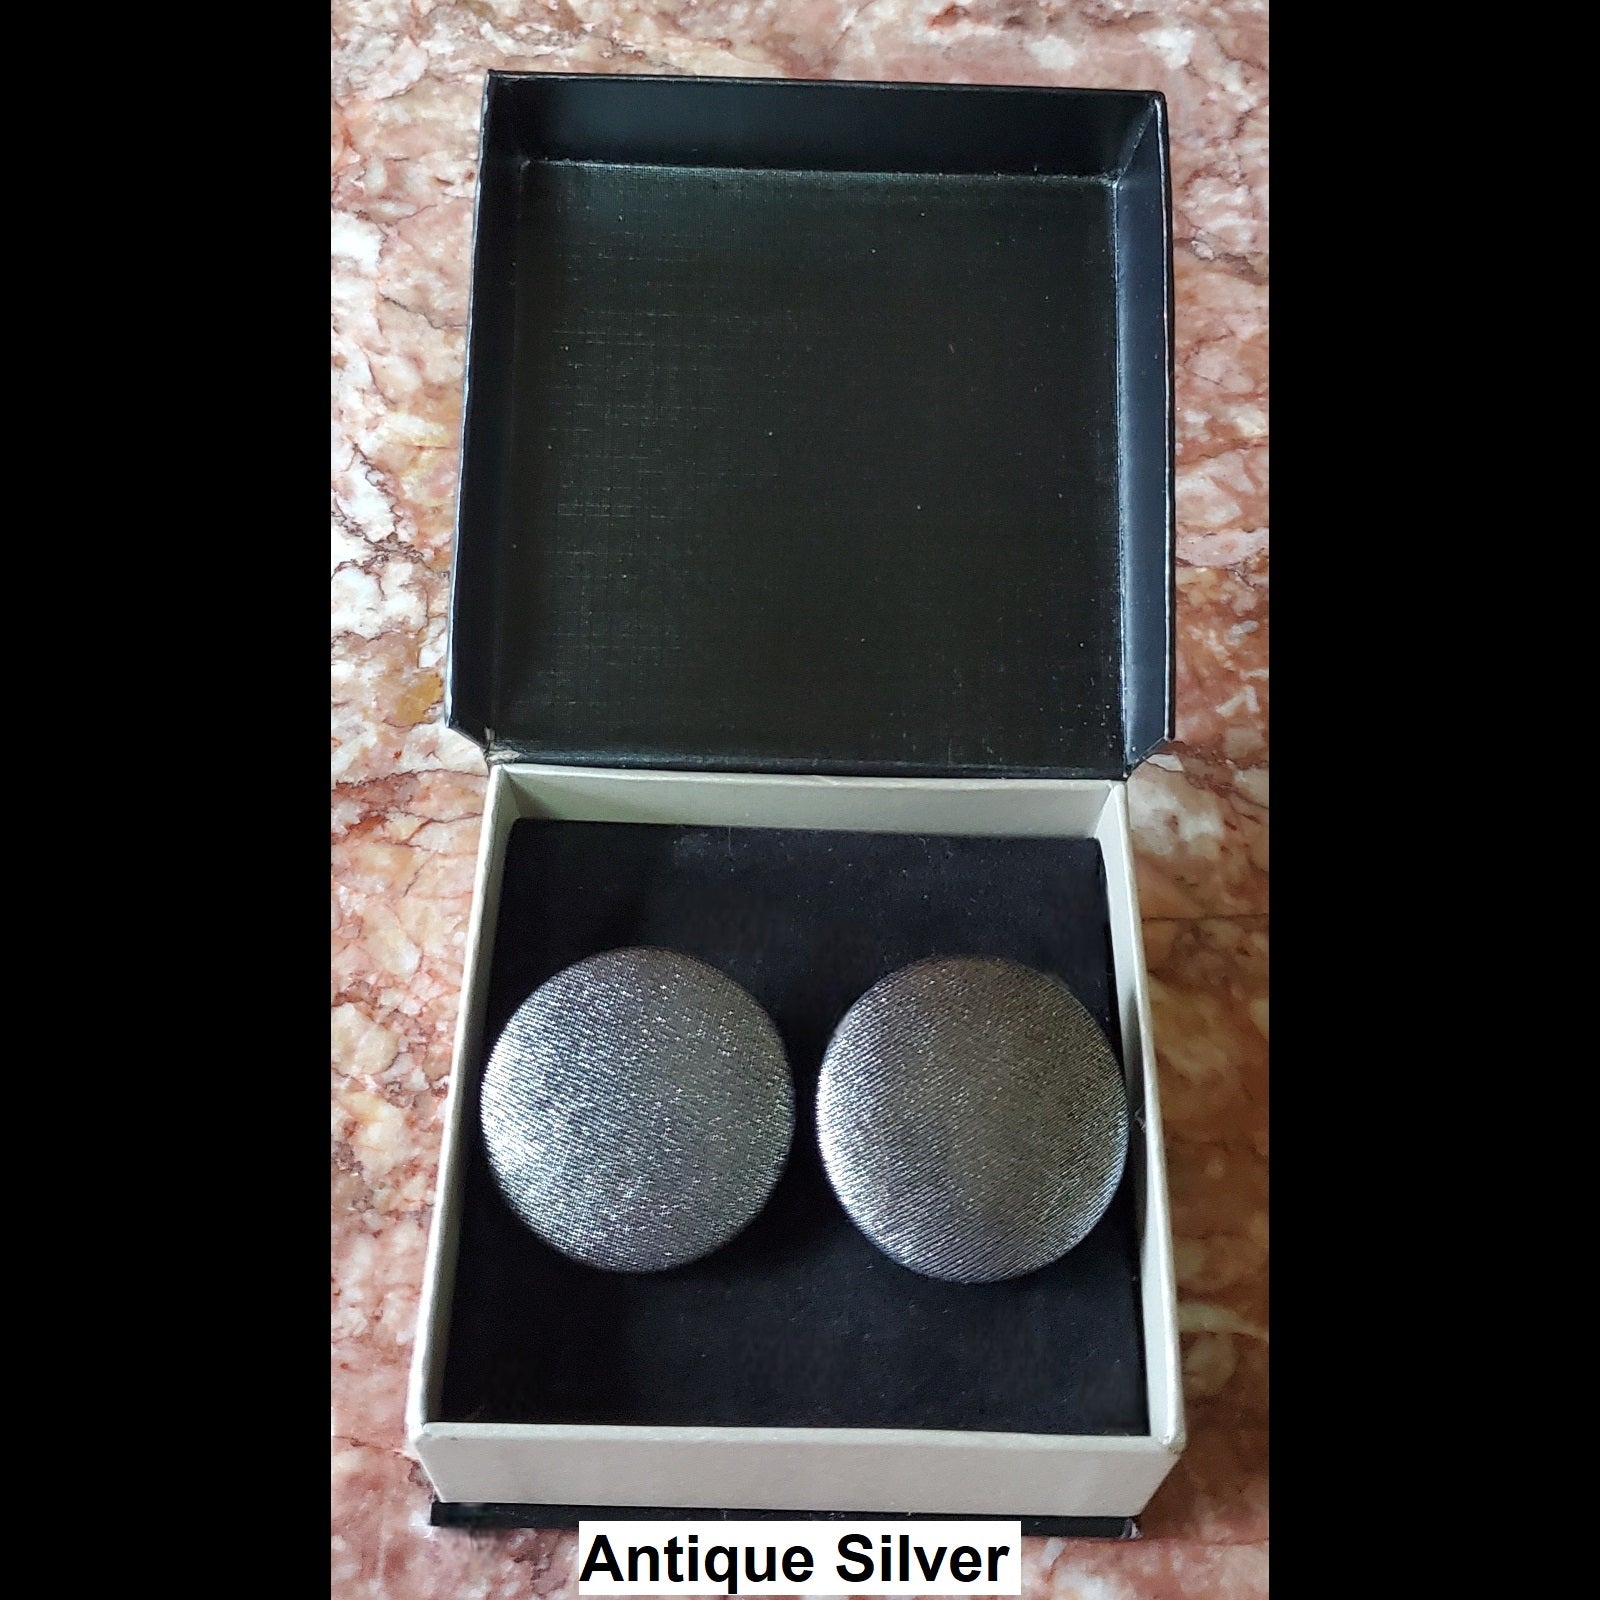 Antique Silver button earrings in jewelry box